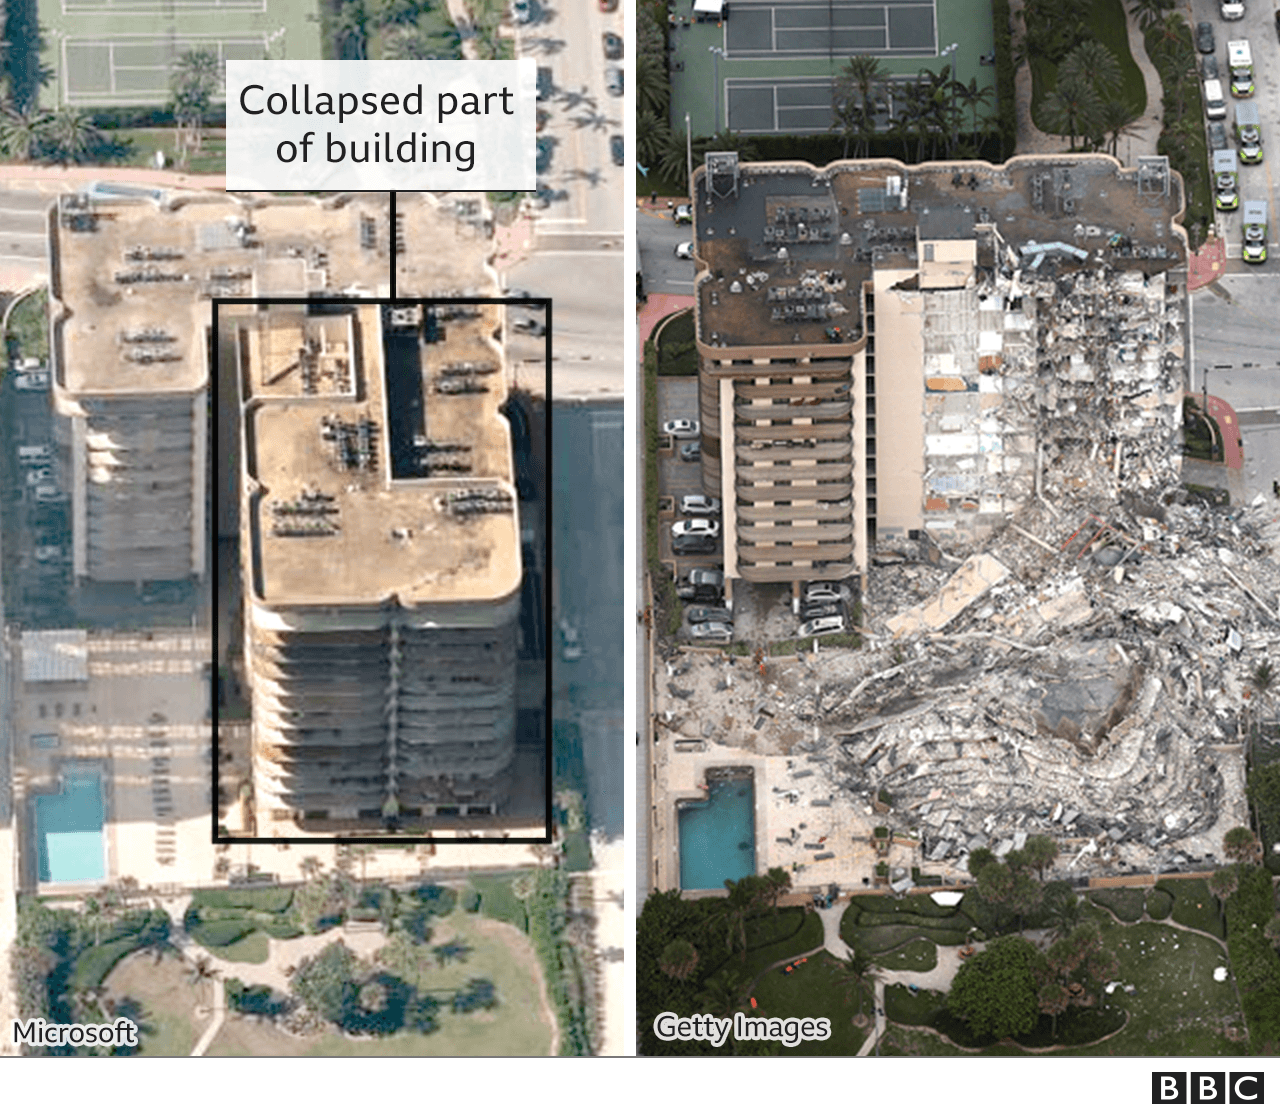 Graphic showing images of the building before and after it collapsed